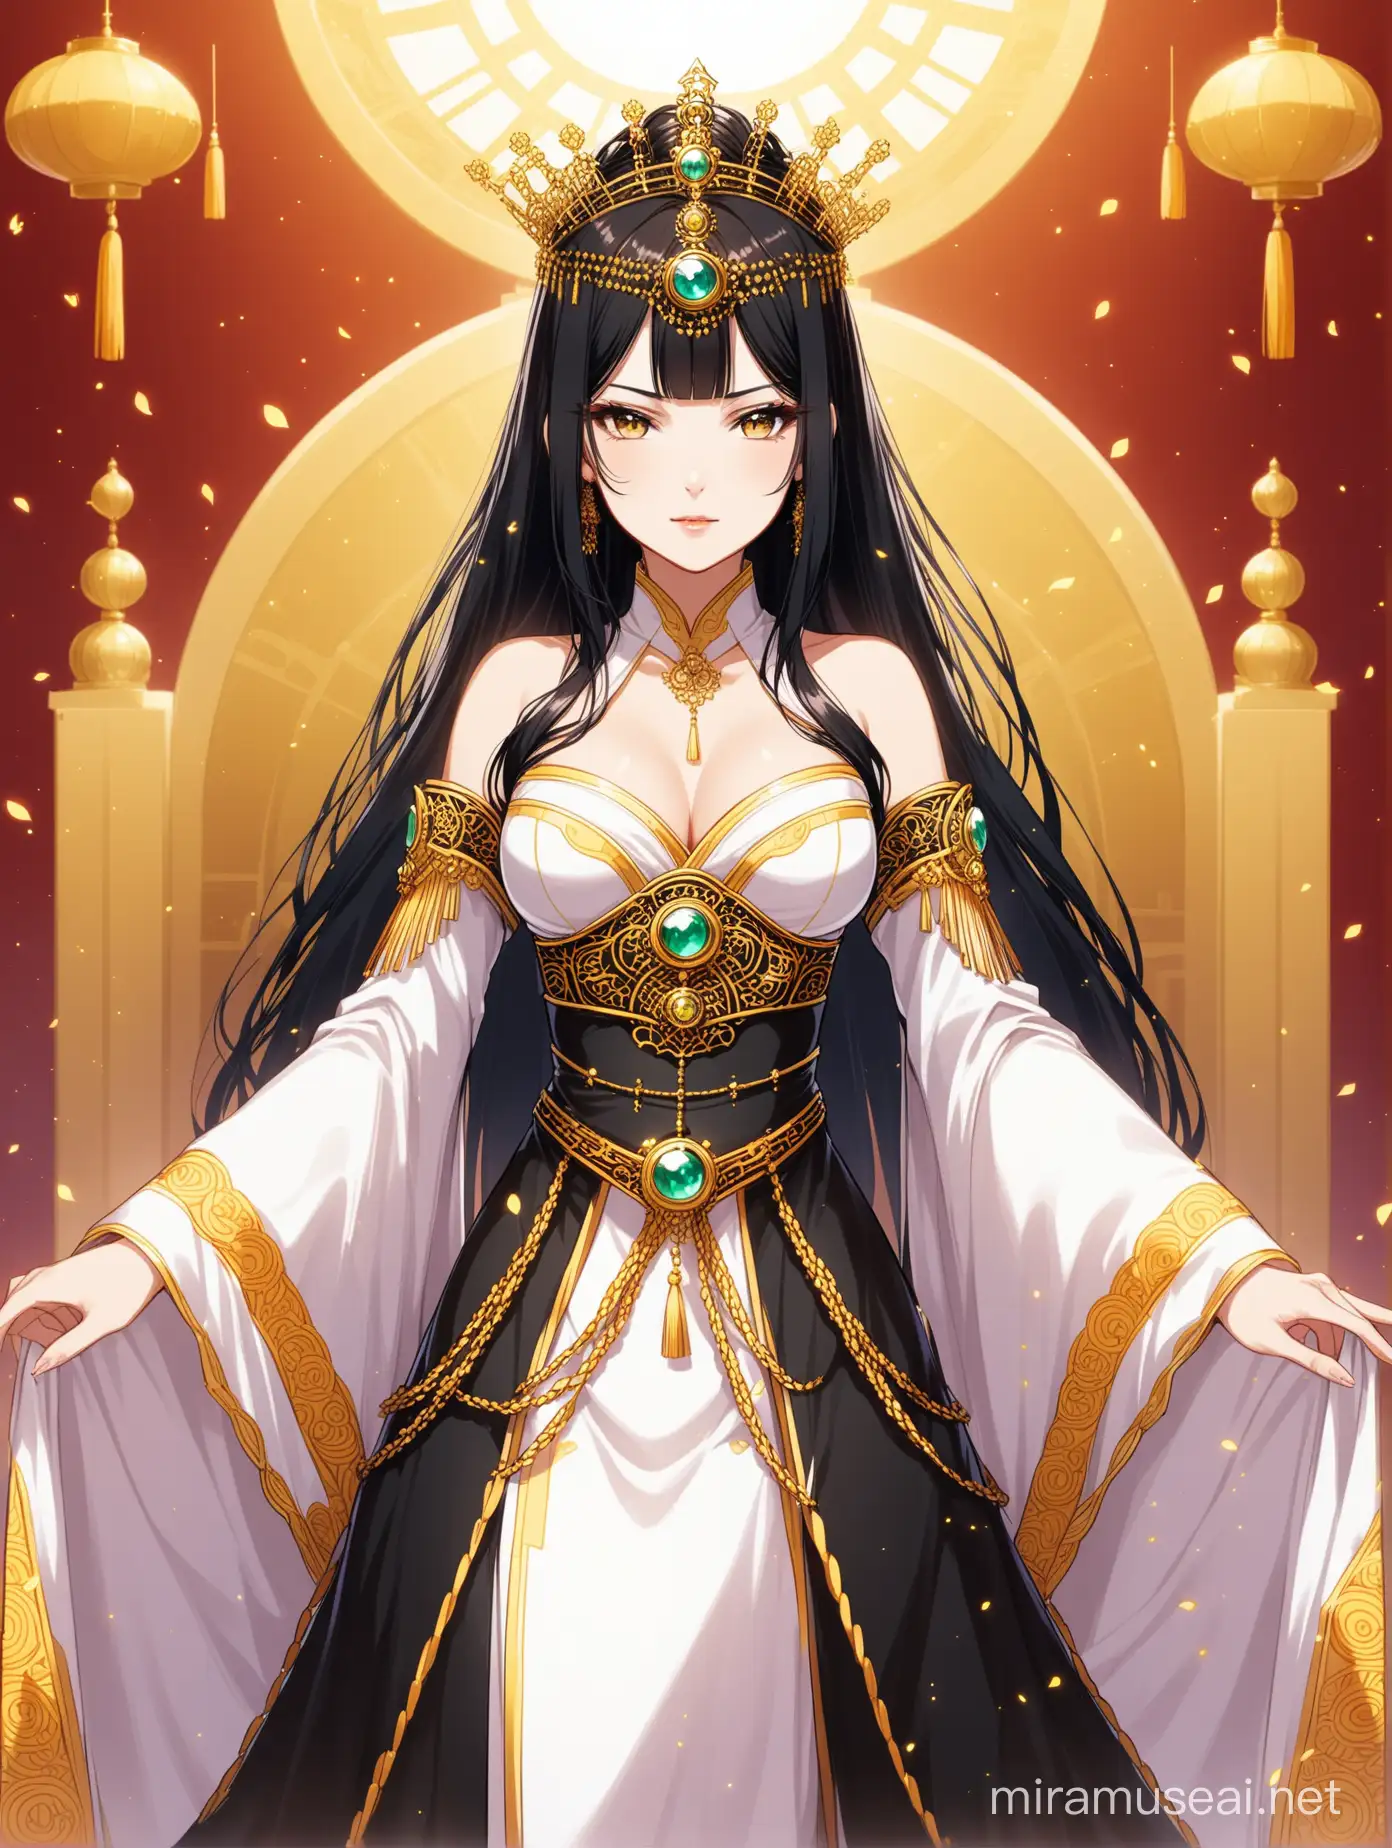 AnimeStyle BlackHaired Woman Cosplaying as Empress